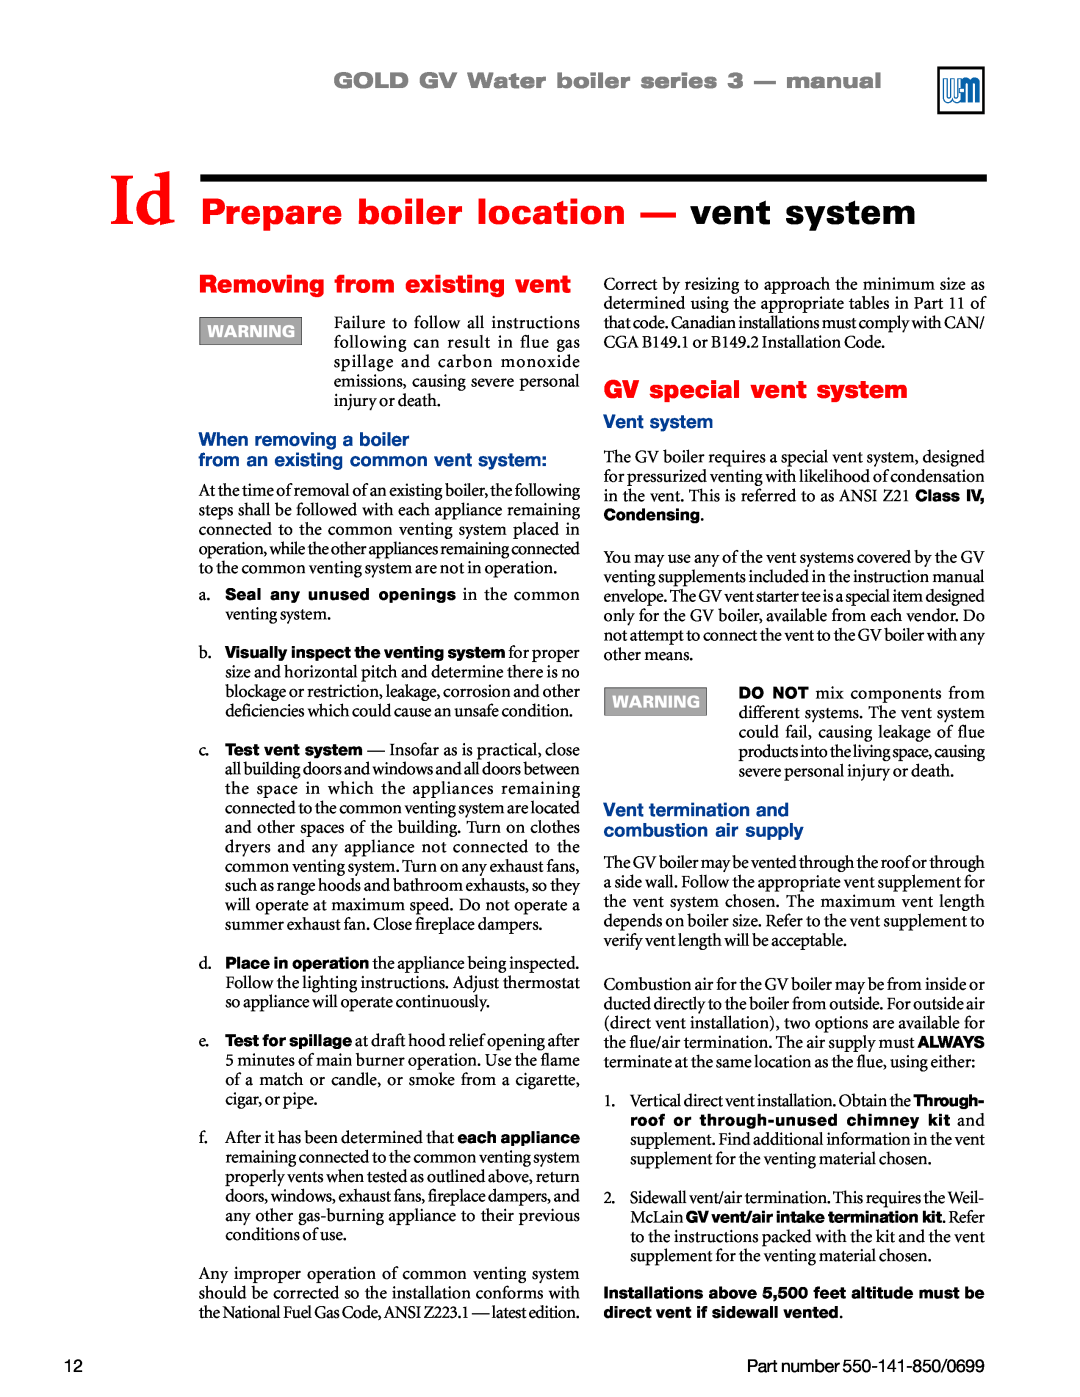 Weil-McLain GOLD DV WATER BOILER manual Id Prepare boiler location — vent system, Removing from existing vent, Vent system 